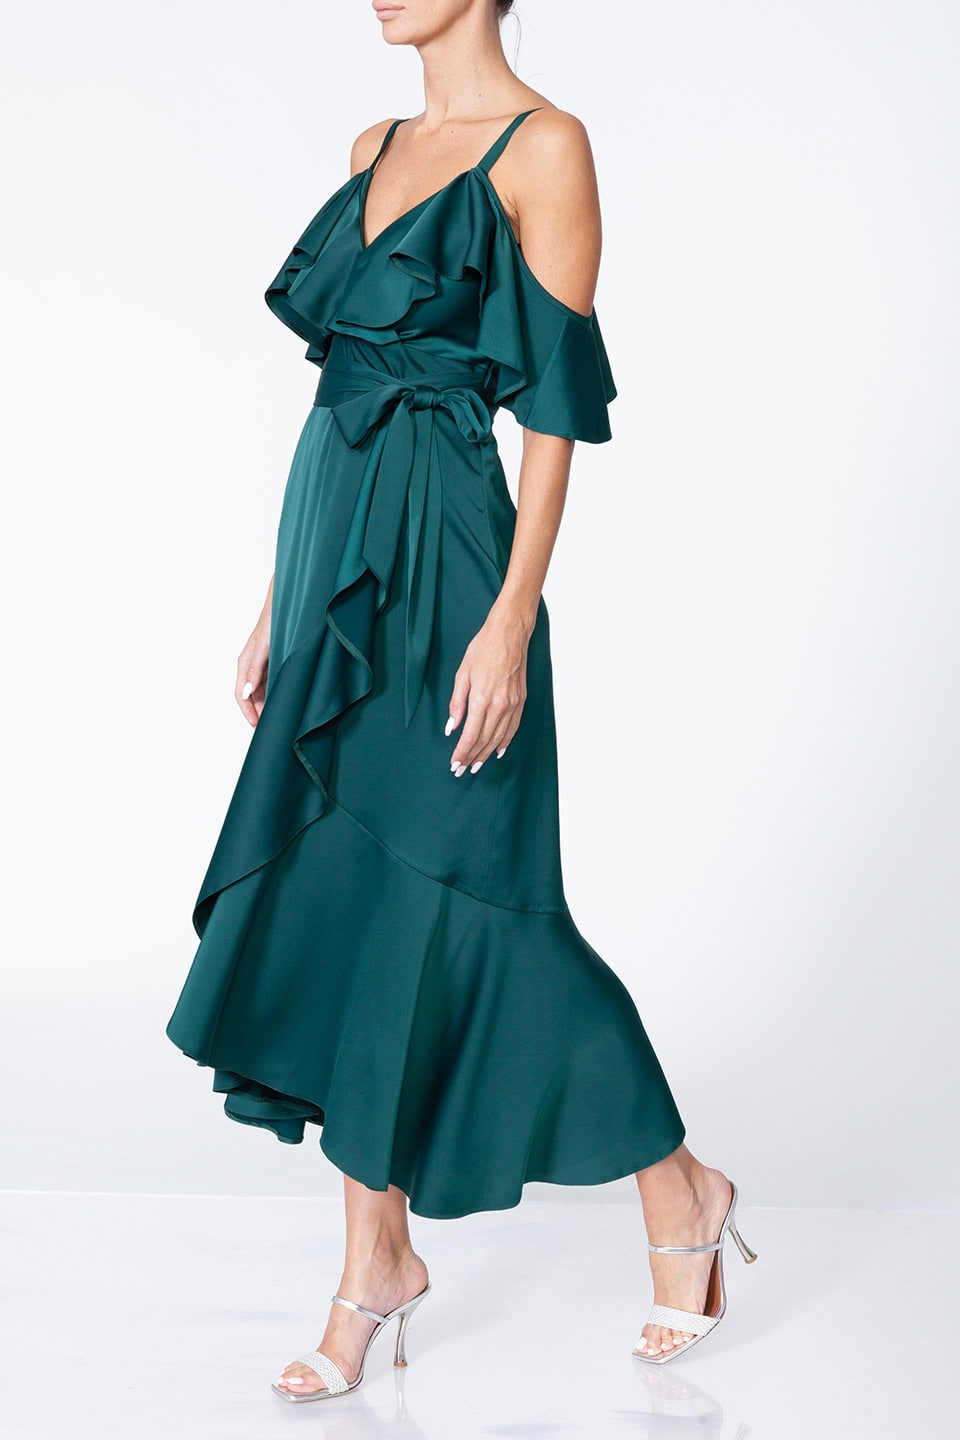 Thumbnail for Product gallery 2, Anze fashion designer's Thea midi dress in Eemerald color, left side and full-body view